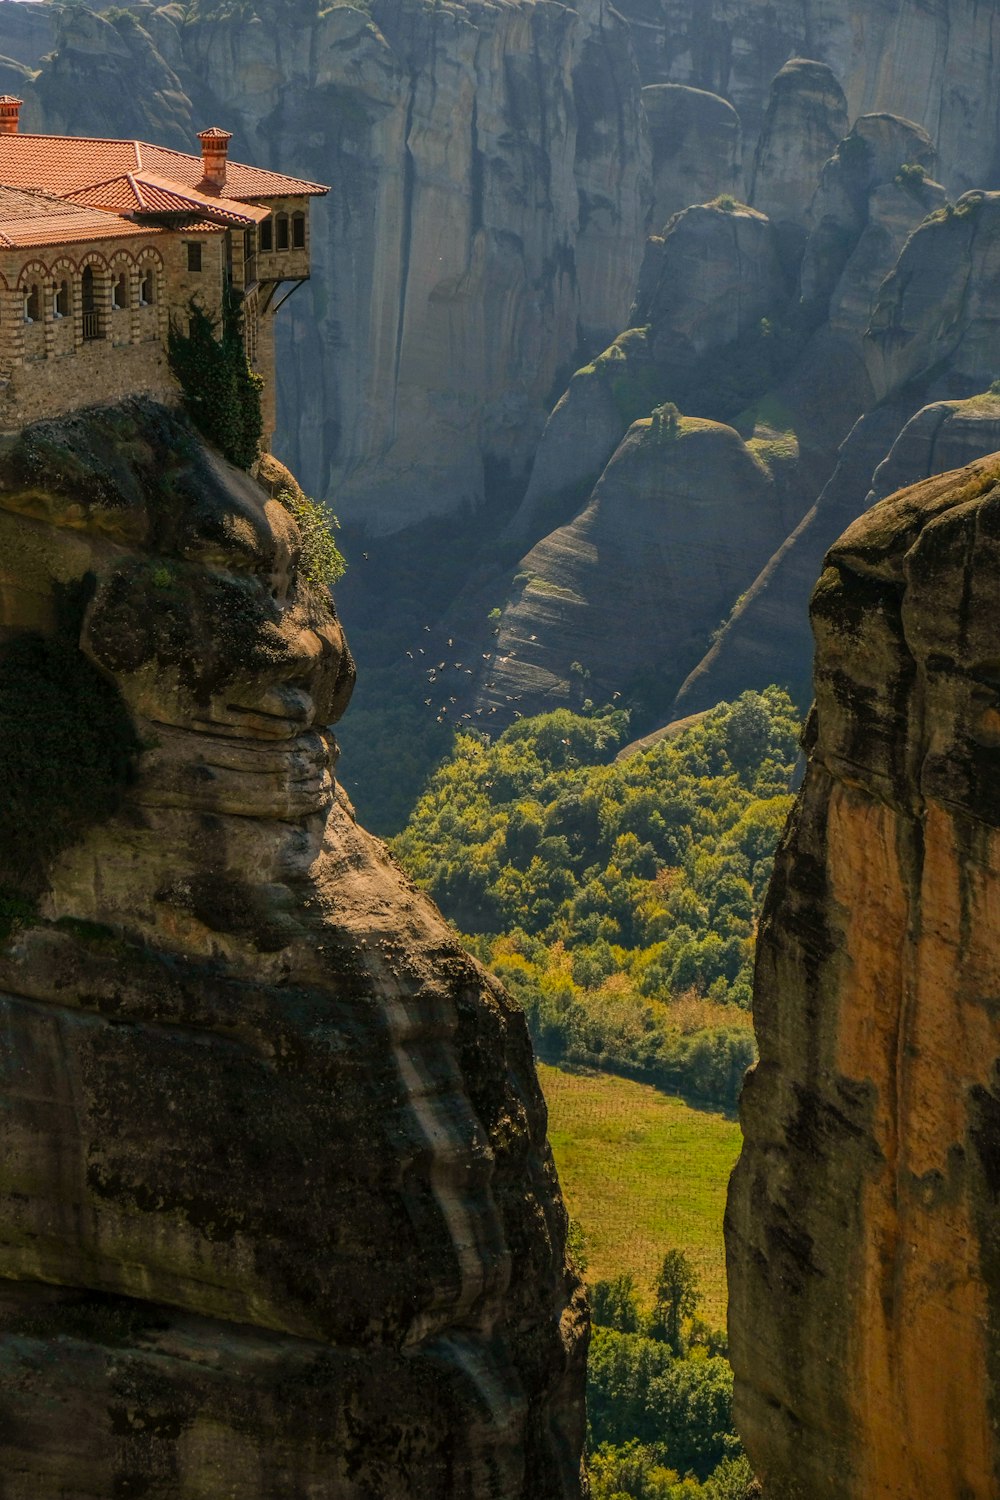 a castle perched on top of a cliff surrounded by mountains